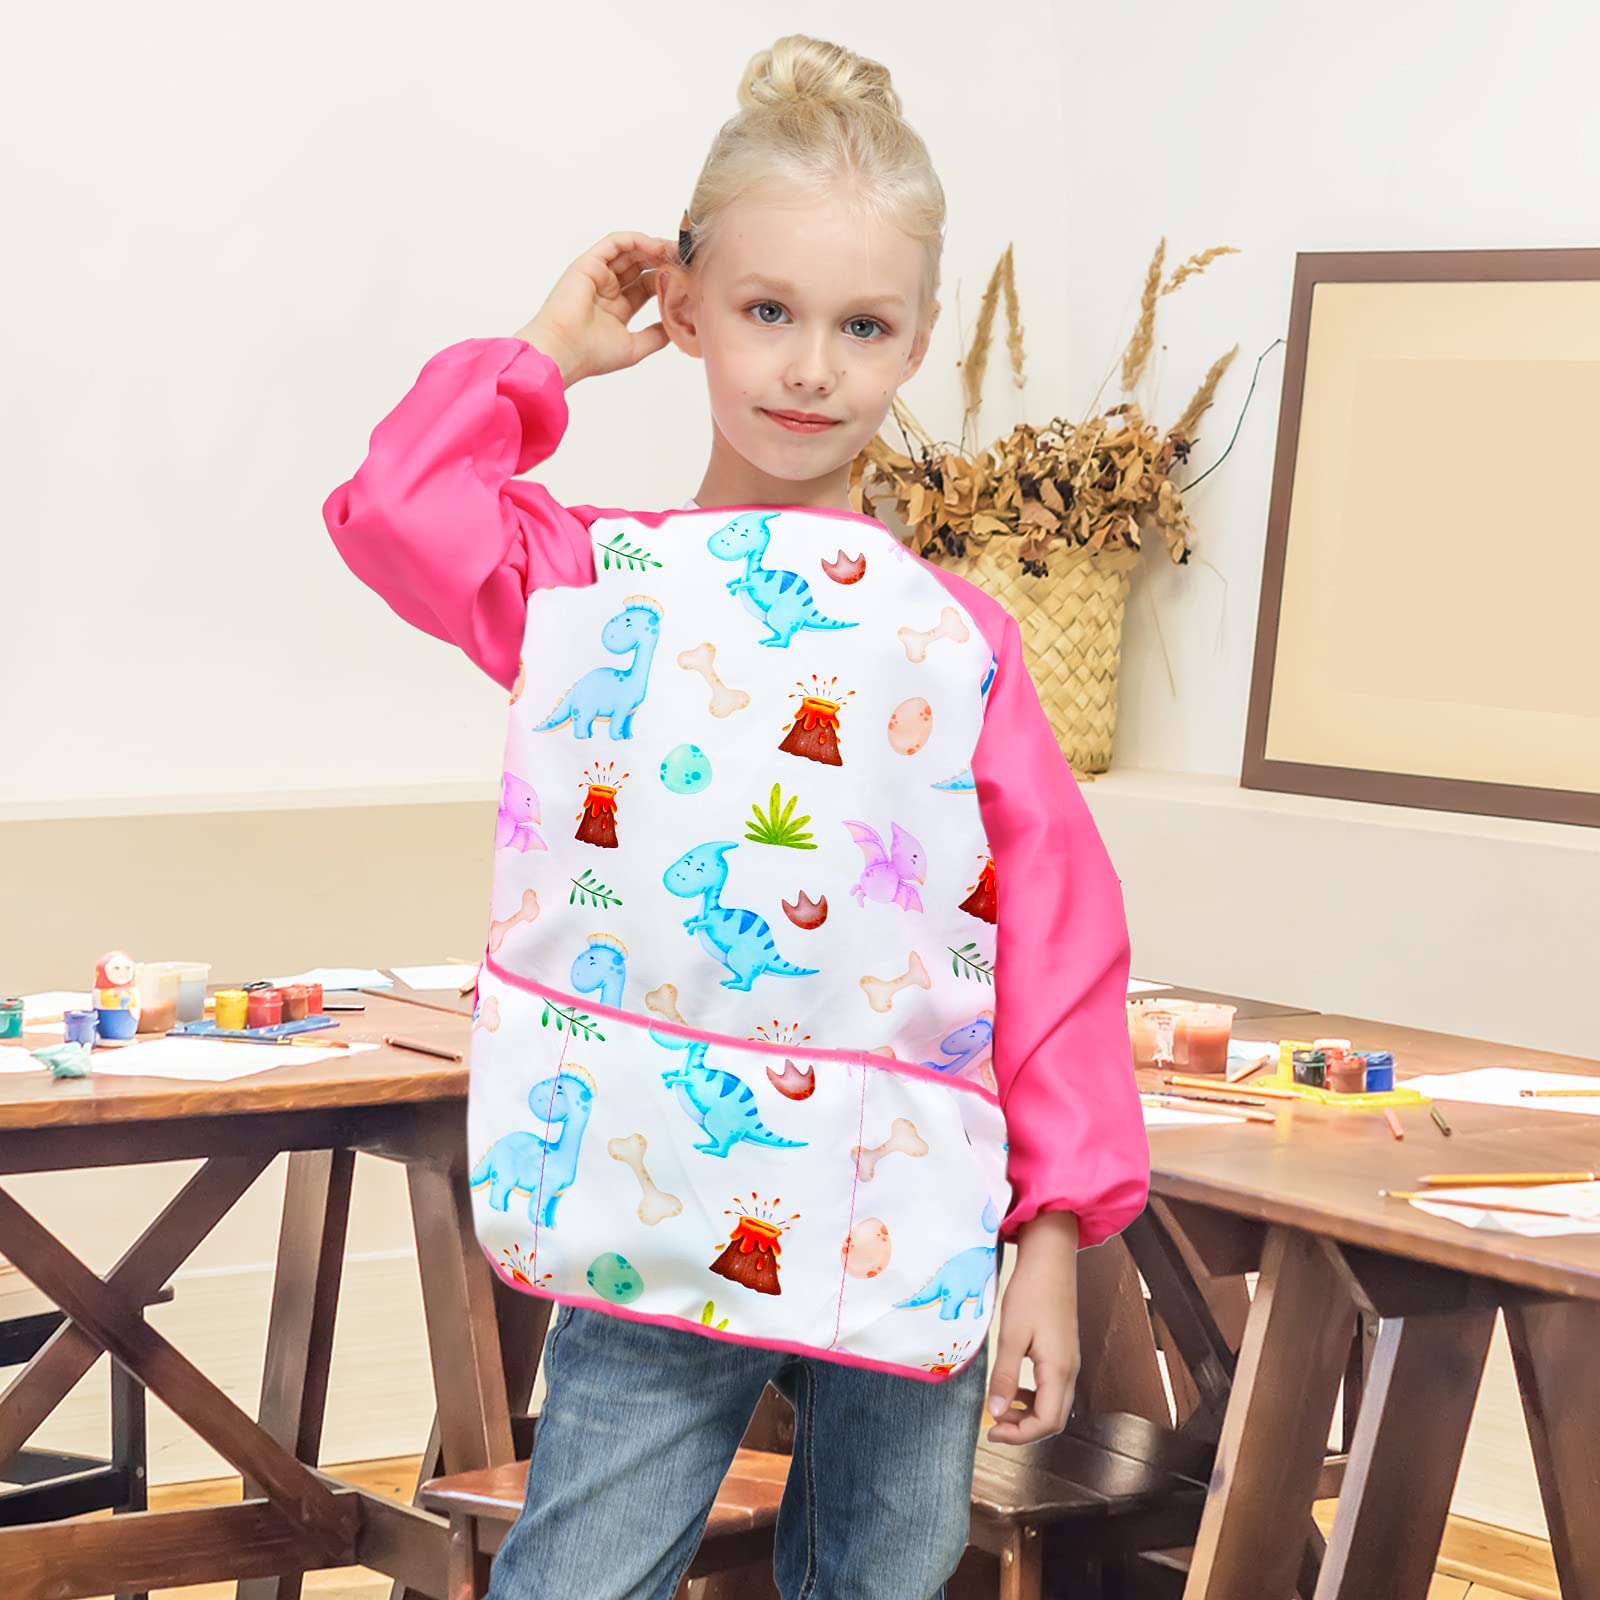 PAMAID 2 Pack Kids Art Smock Waterproof Artist Painting Aprons with 3 Pockets, Toddler Smock for Age 3-8 Years